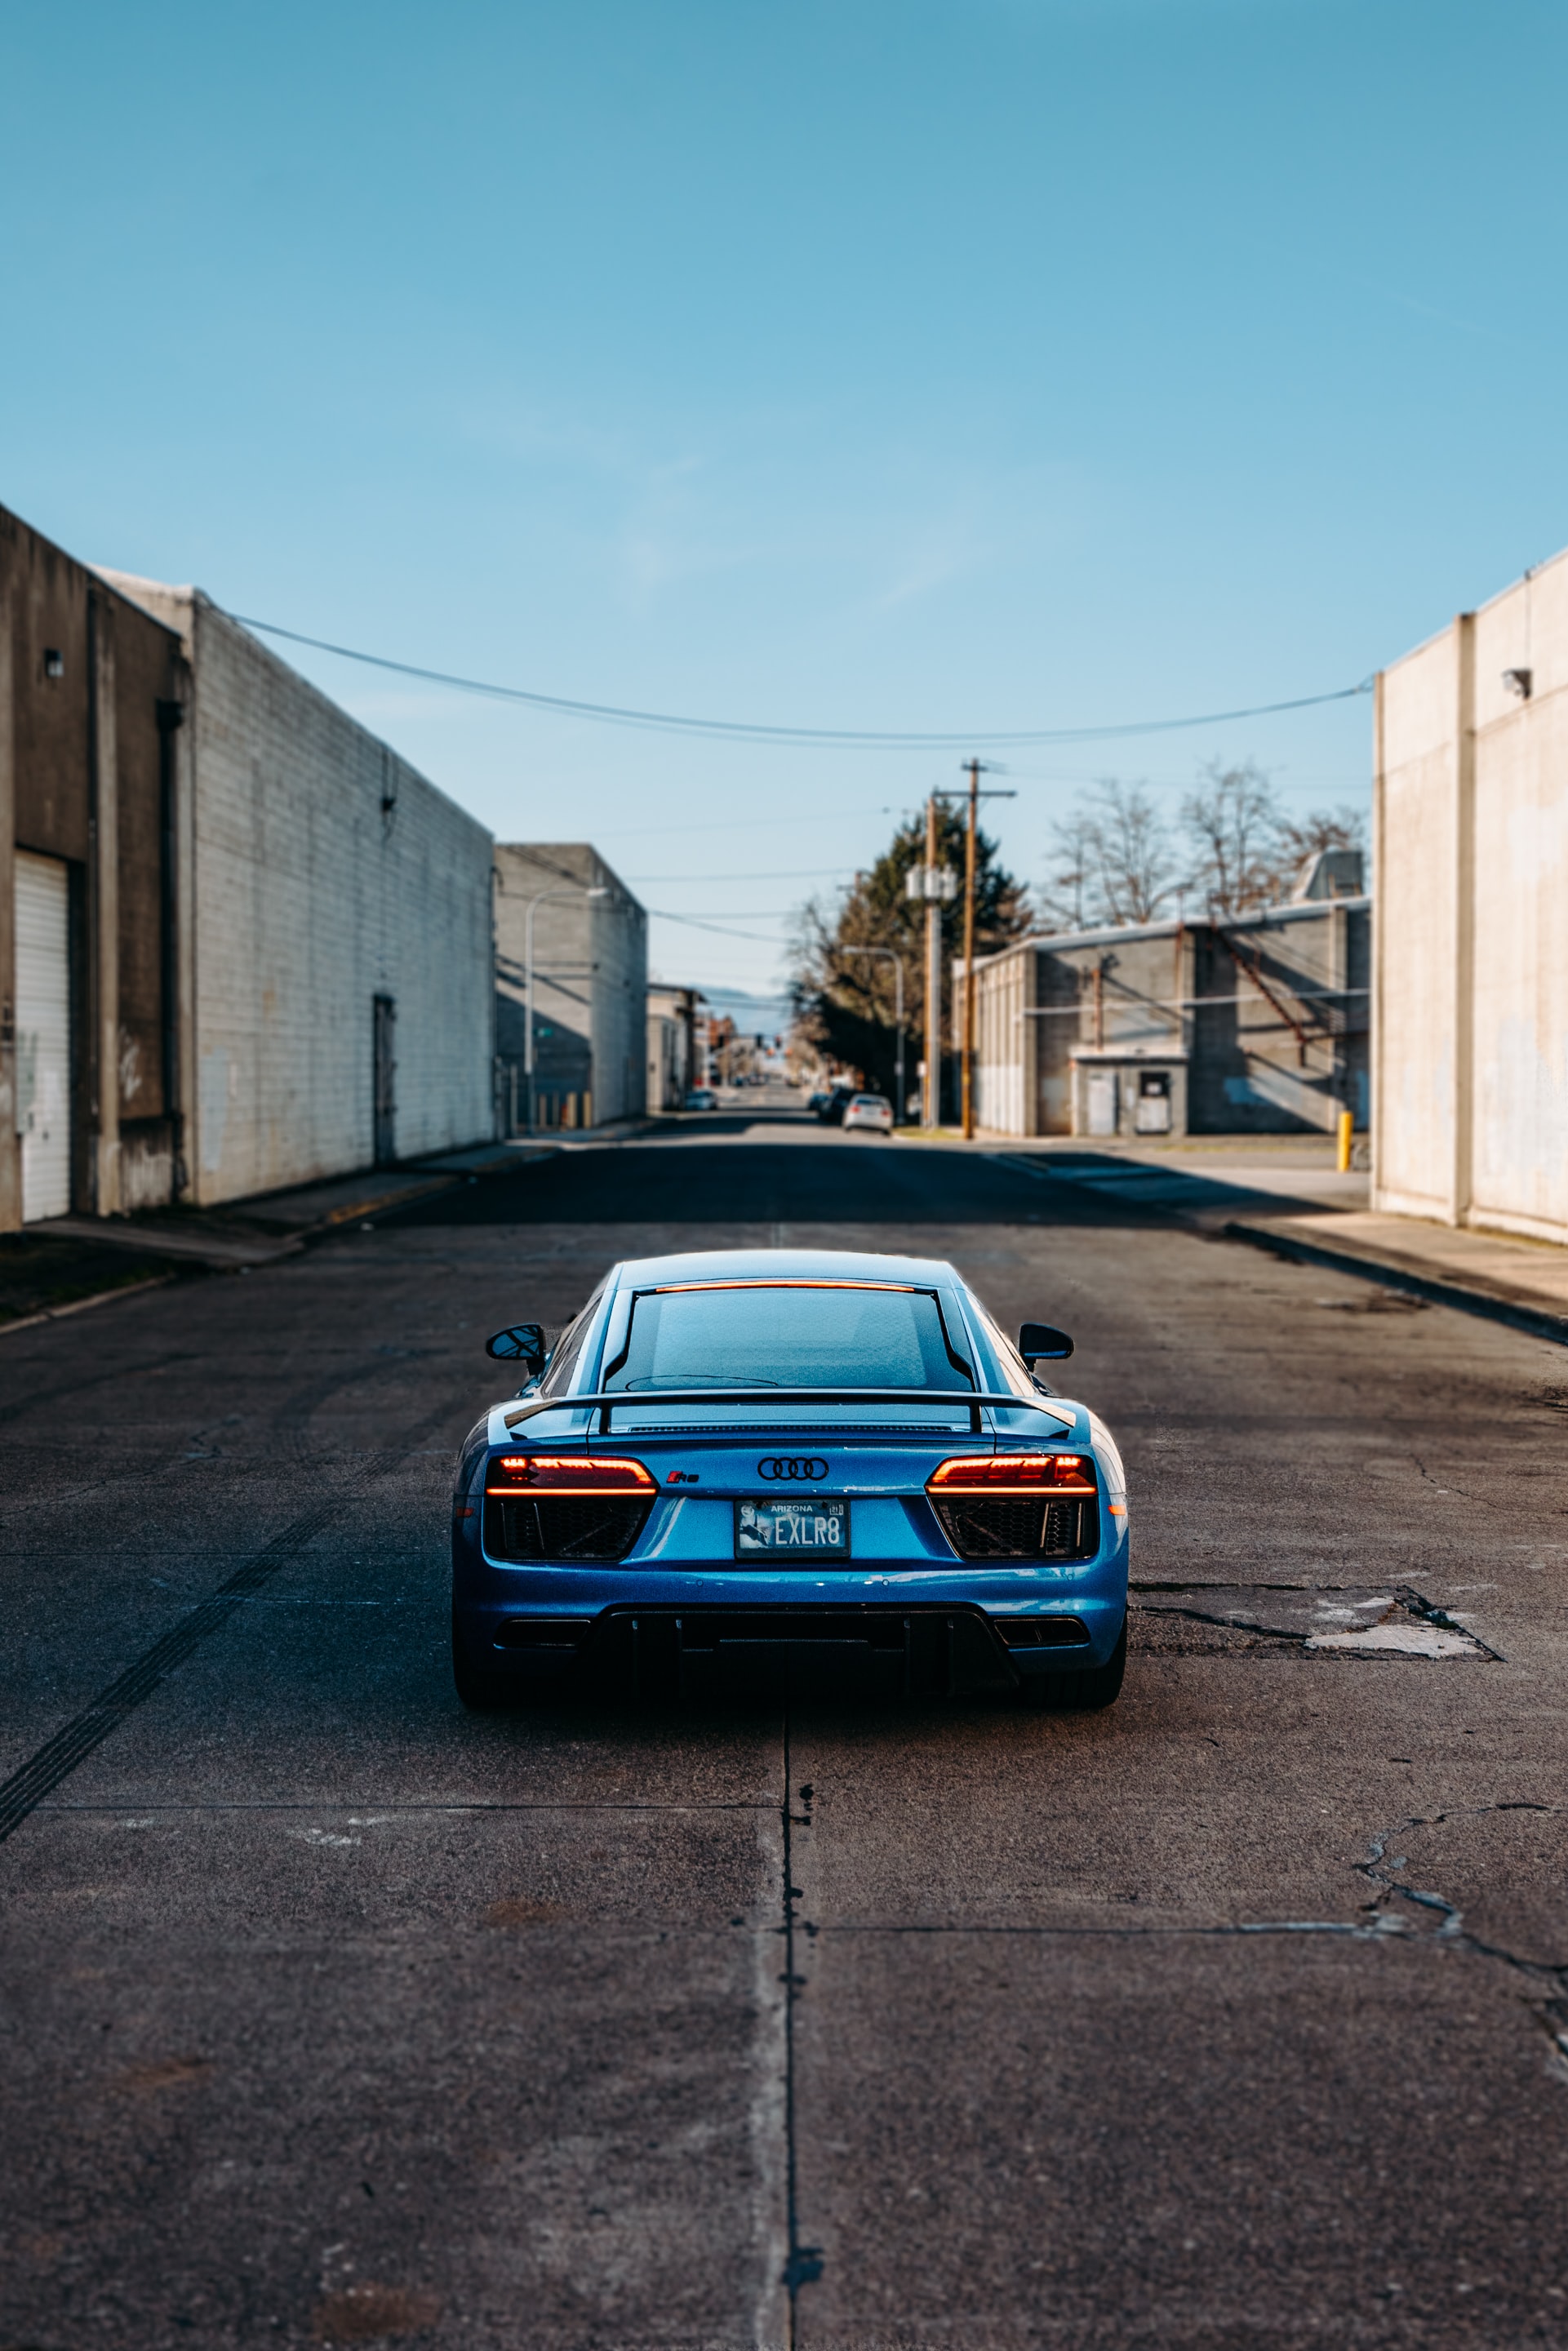 Best Audi R8 mobile Picture